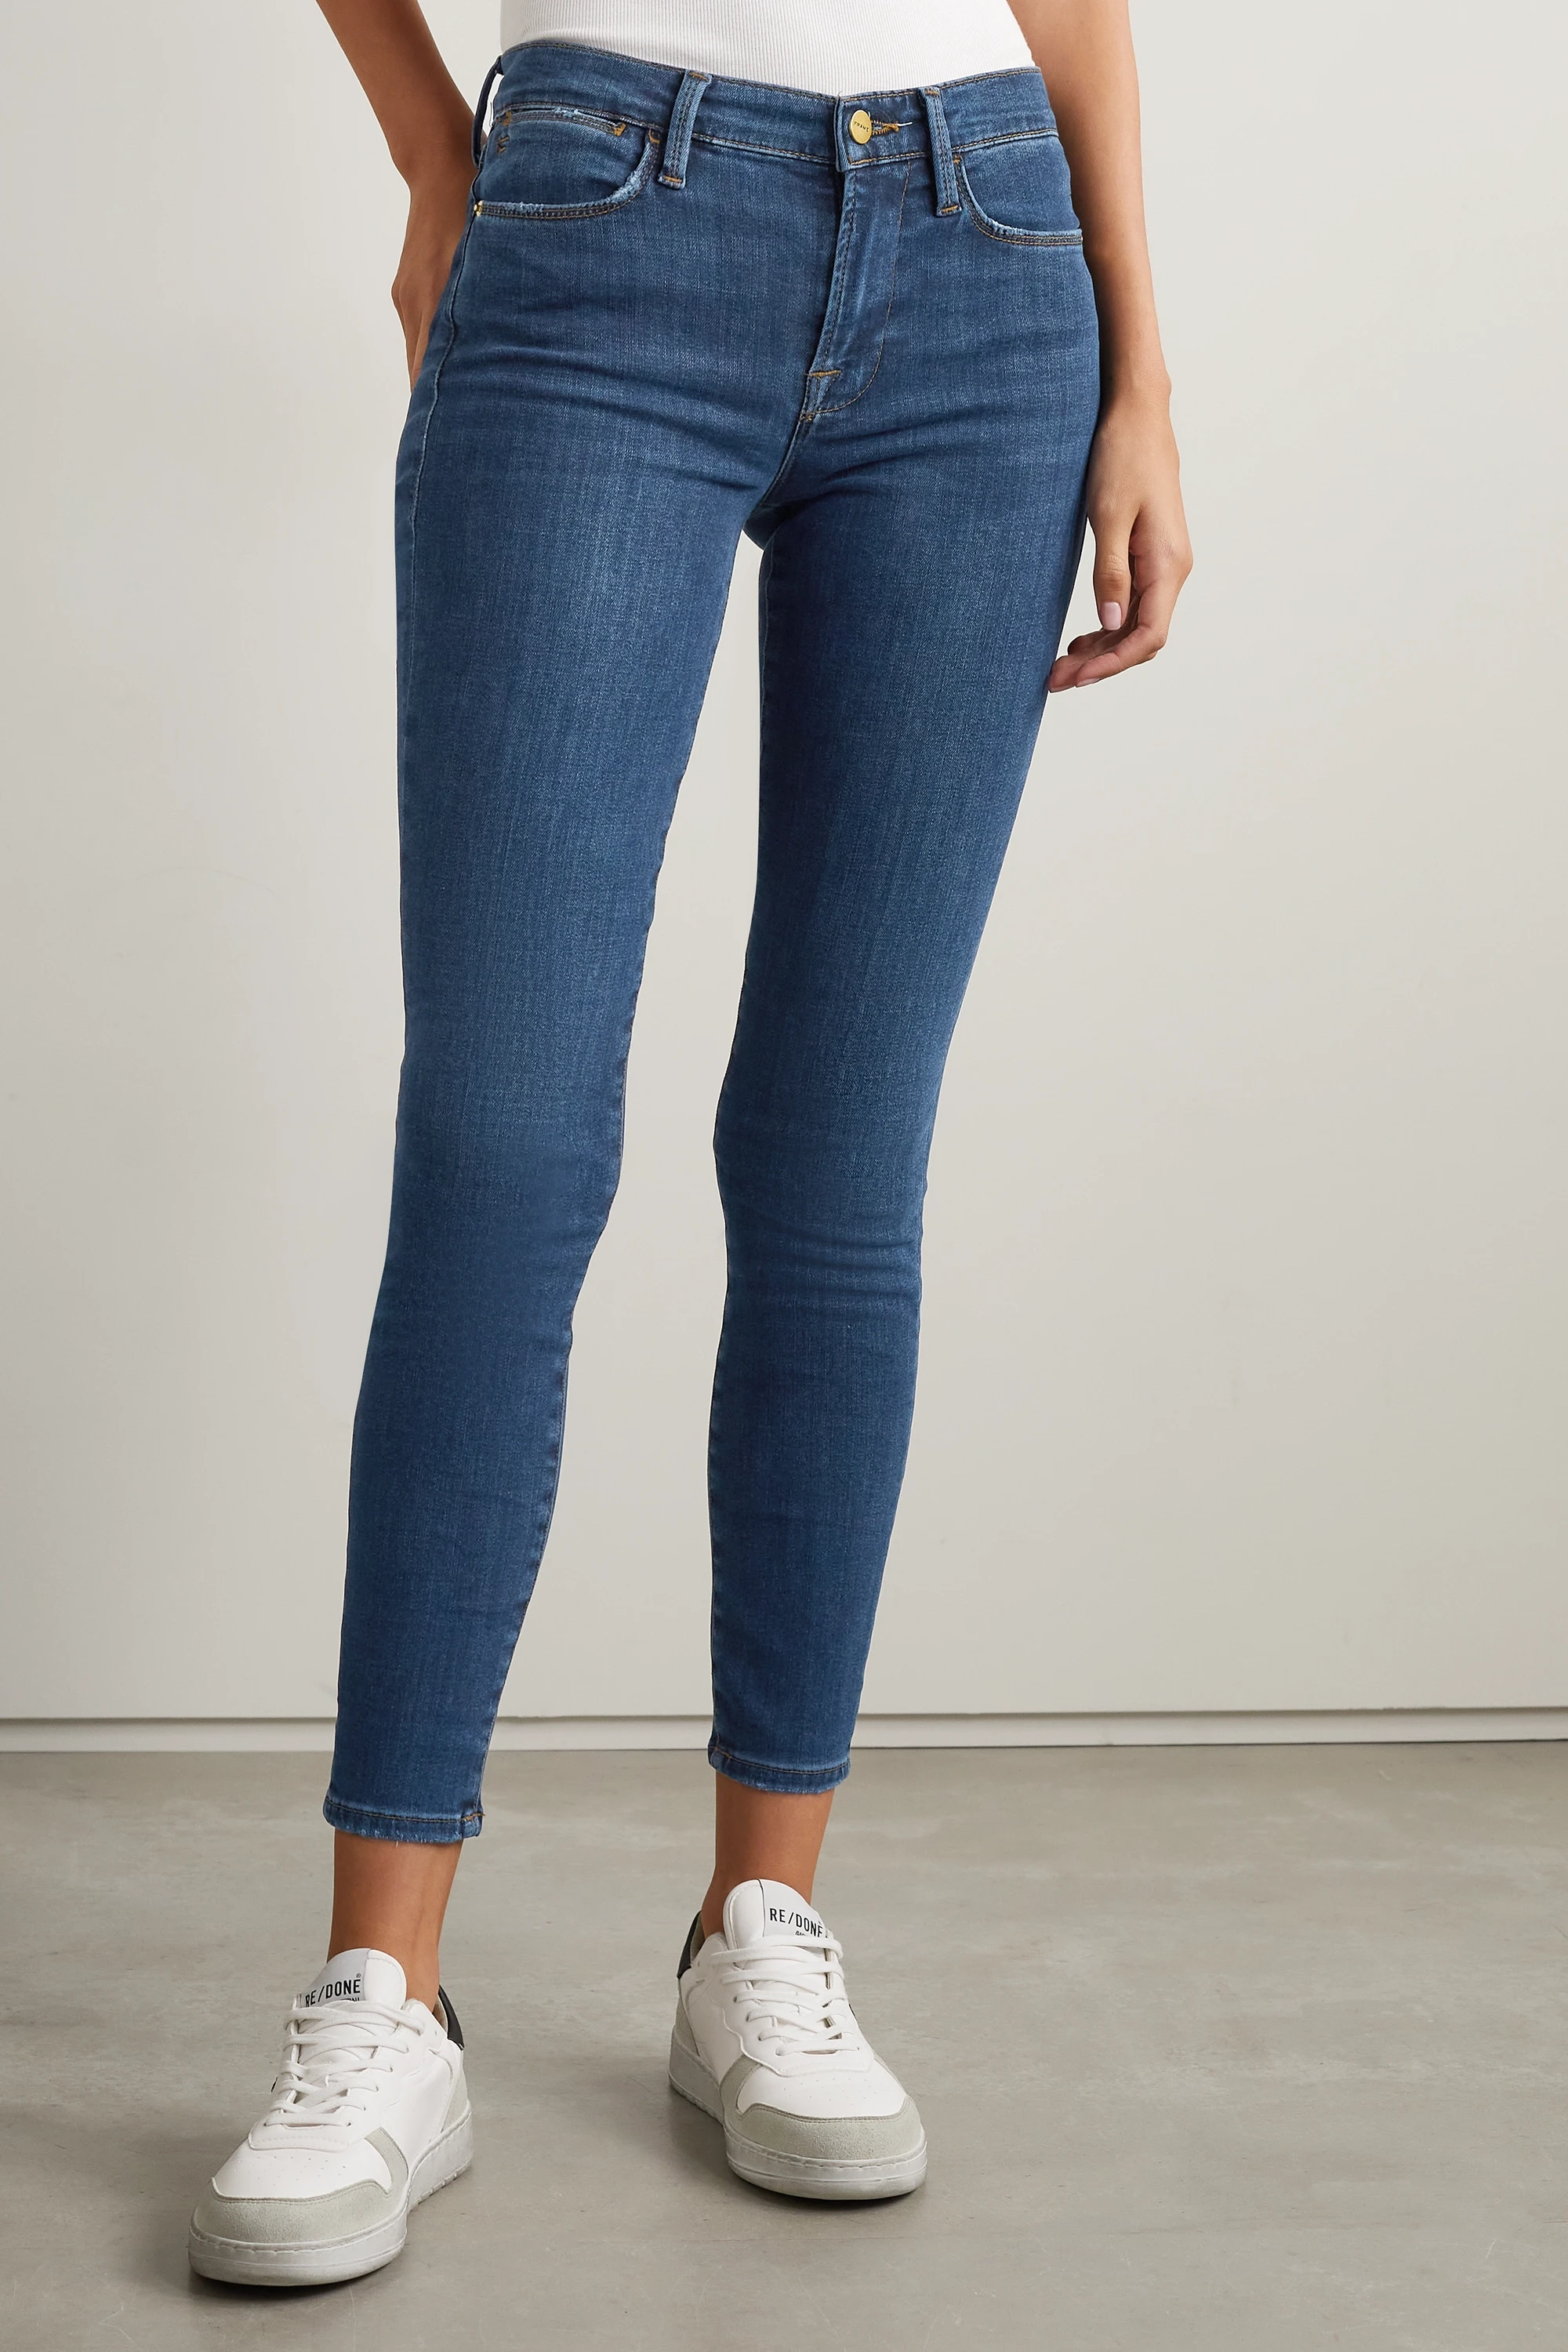 20 Best Jeans for Women of All Sizes 2023